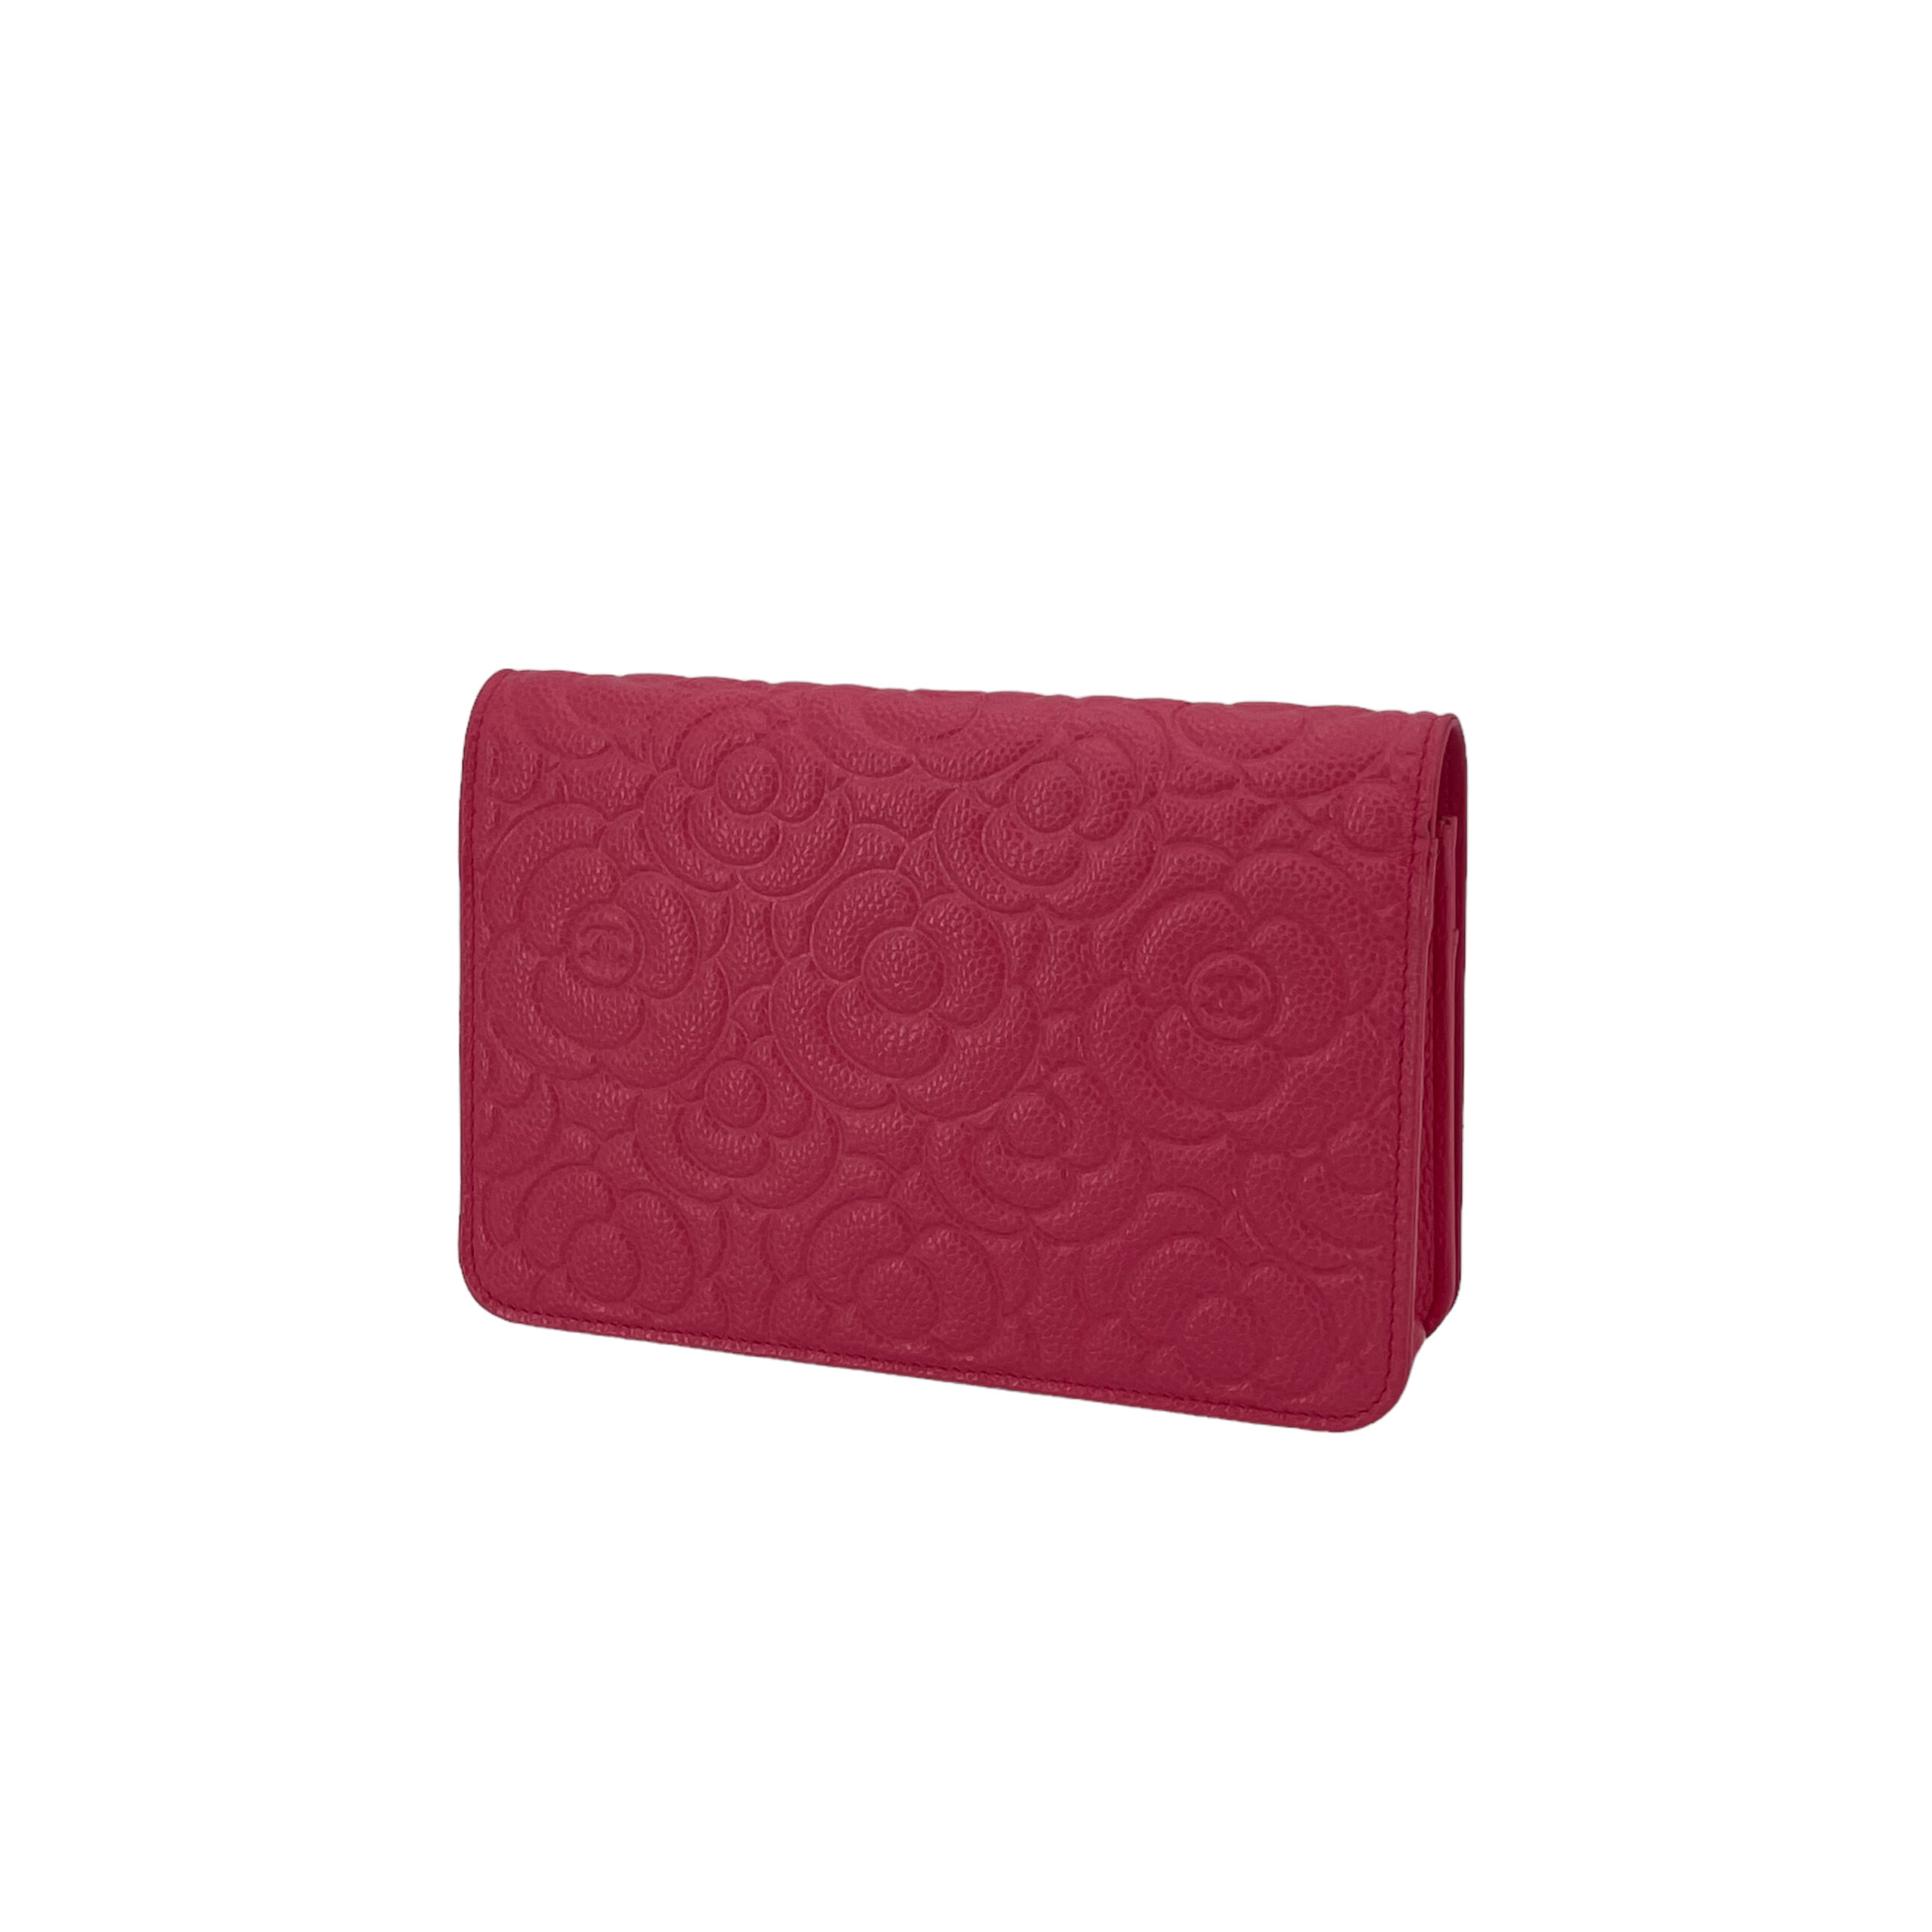 Buy Pre-Owned CHANEL WOC Wallet on Chain Fuschsia Leather